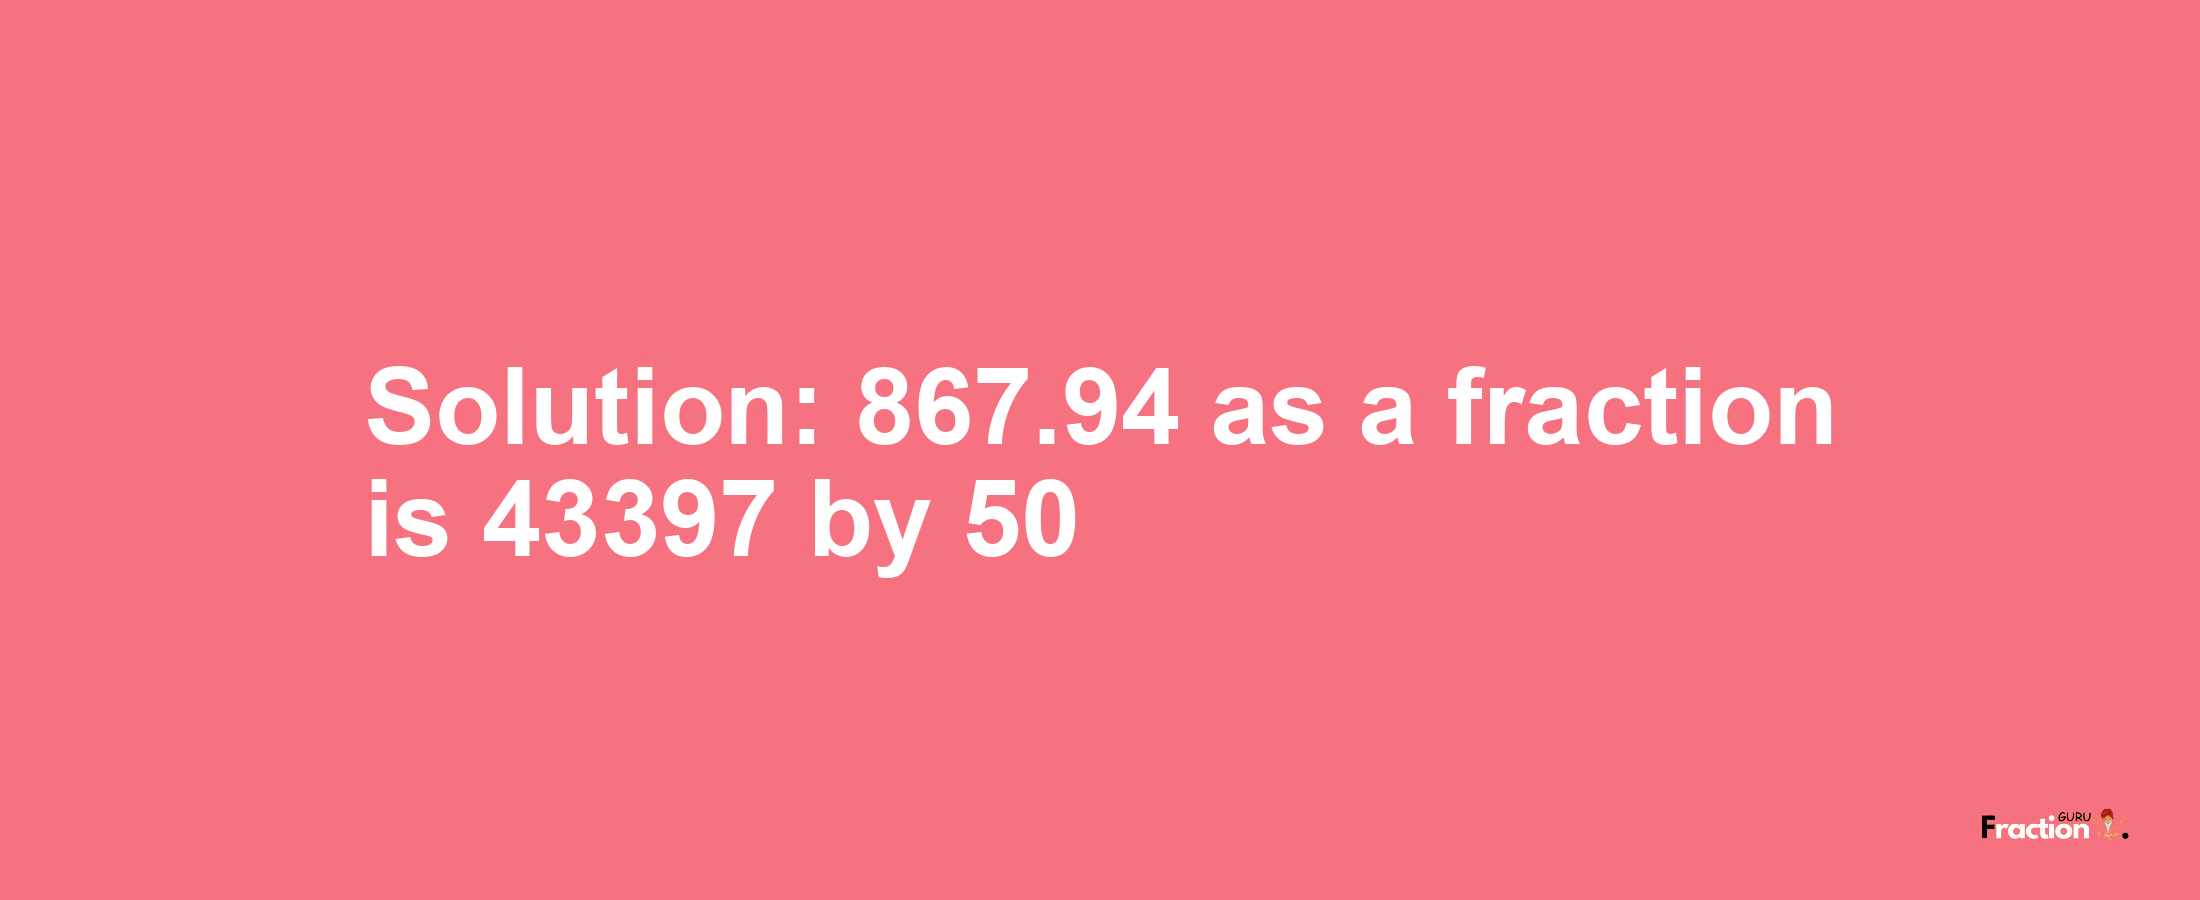 Solution:867.94 as a fraction is 43397/50